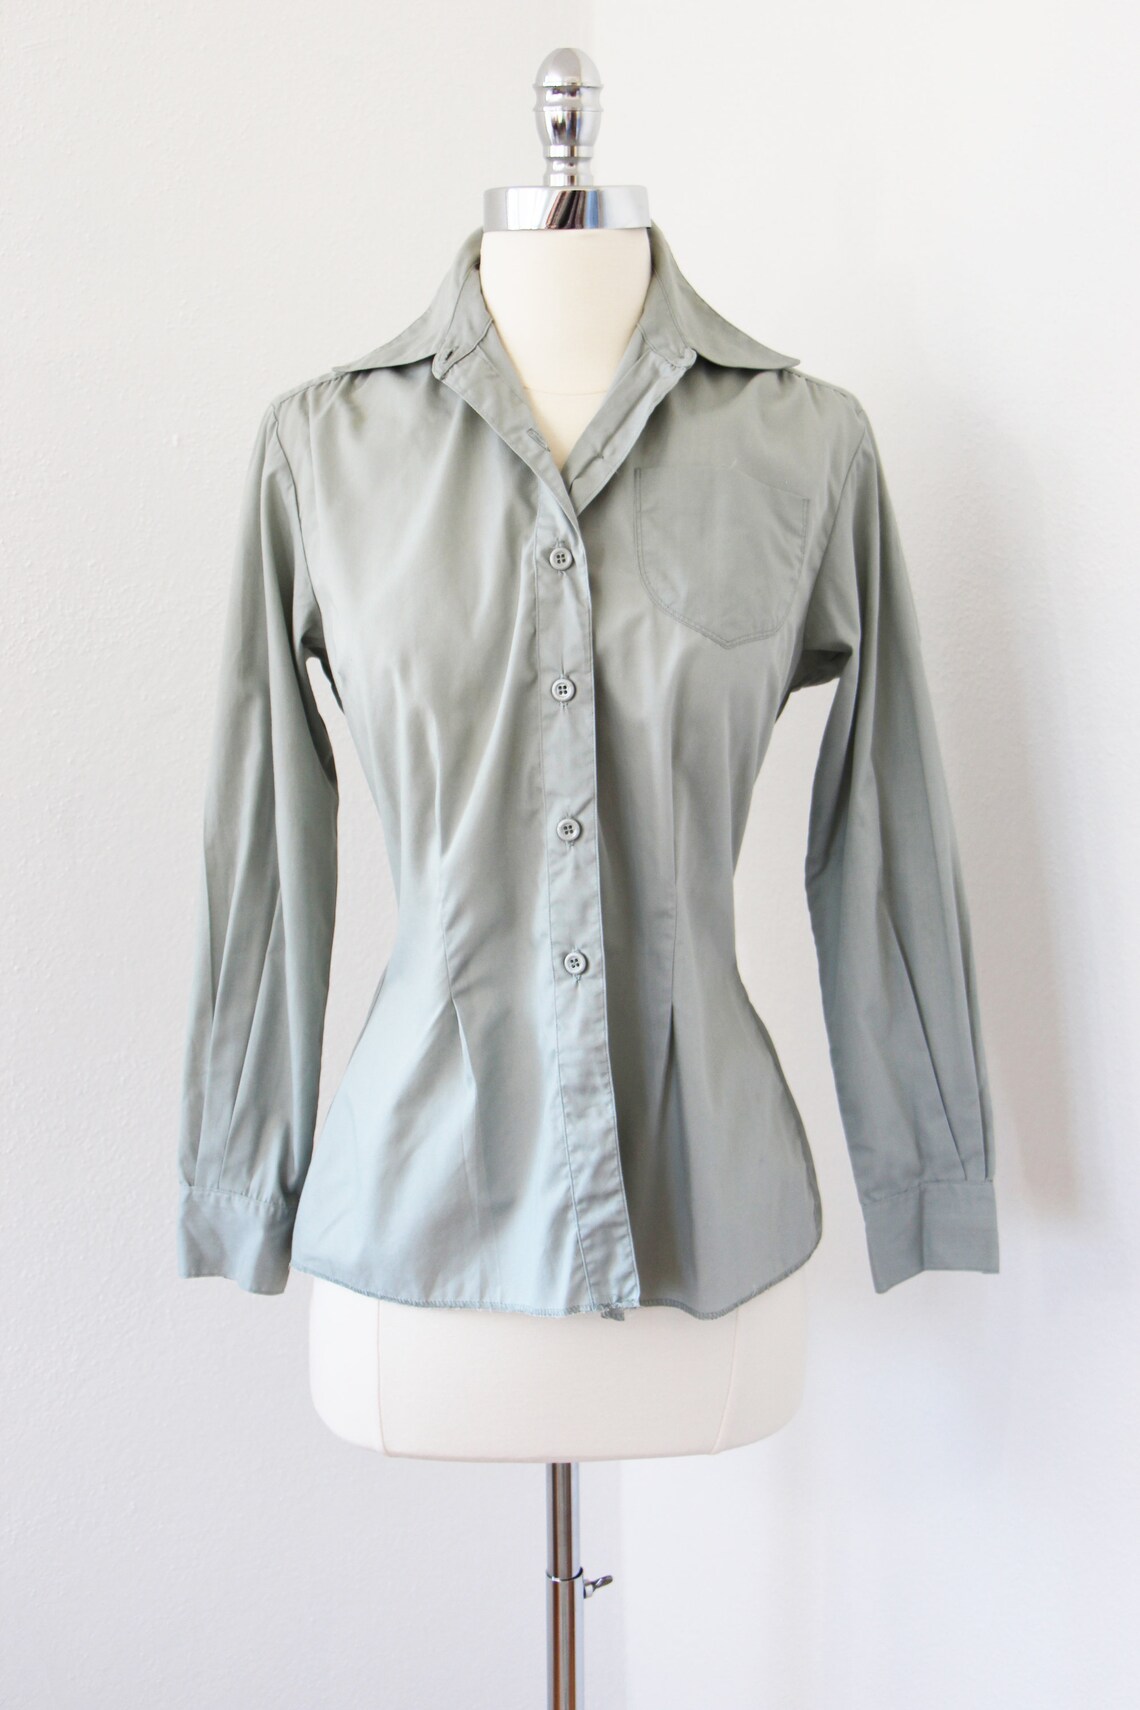 Vintage Marine Corps Blouse 1970s Military Uniform Tapered - Etsy